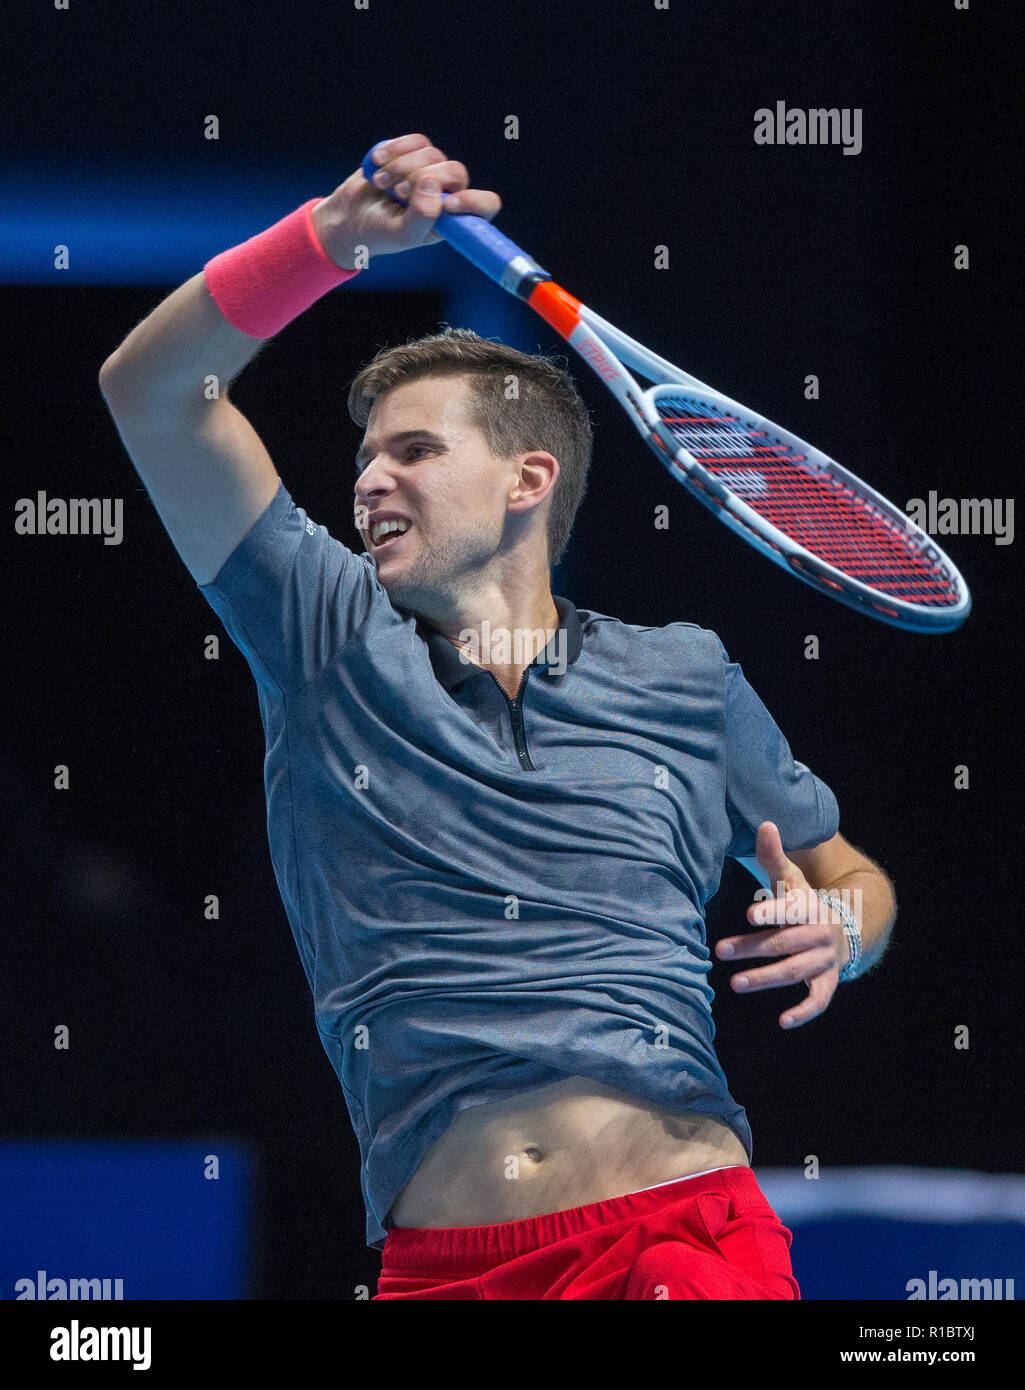 London, UK. 11th Nov 2018. Dominic Thiem (Austria) during the Nitto ATP  World Tour Finals London at the O2, London, England on 11 November 2018.  Photo by Andy Rowland. Credit: Andrew Rowland/Alamy